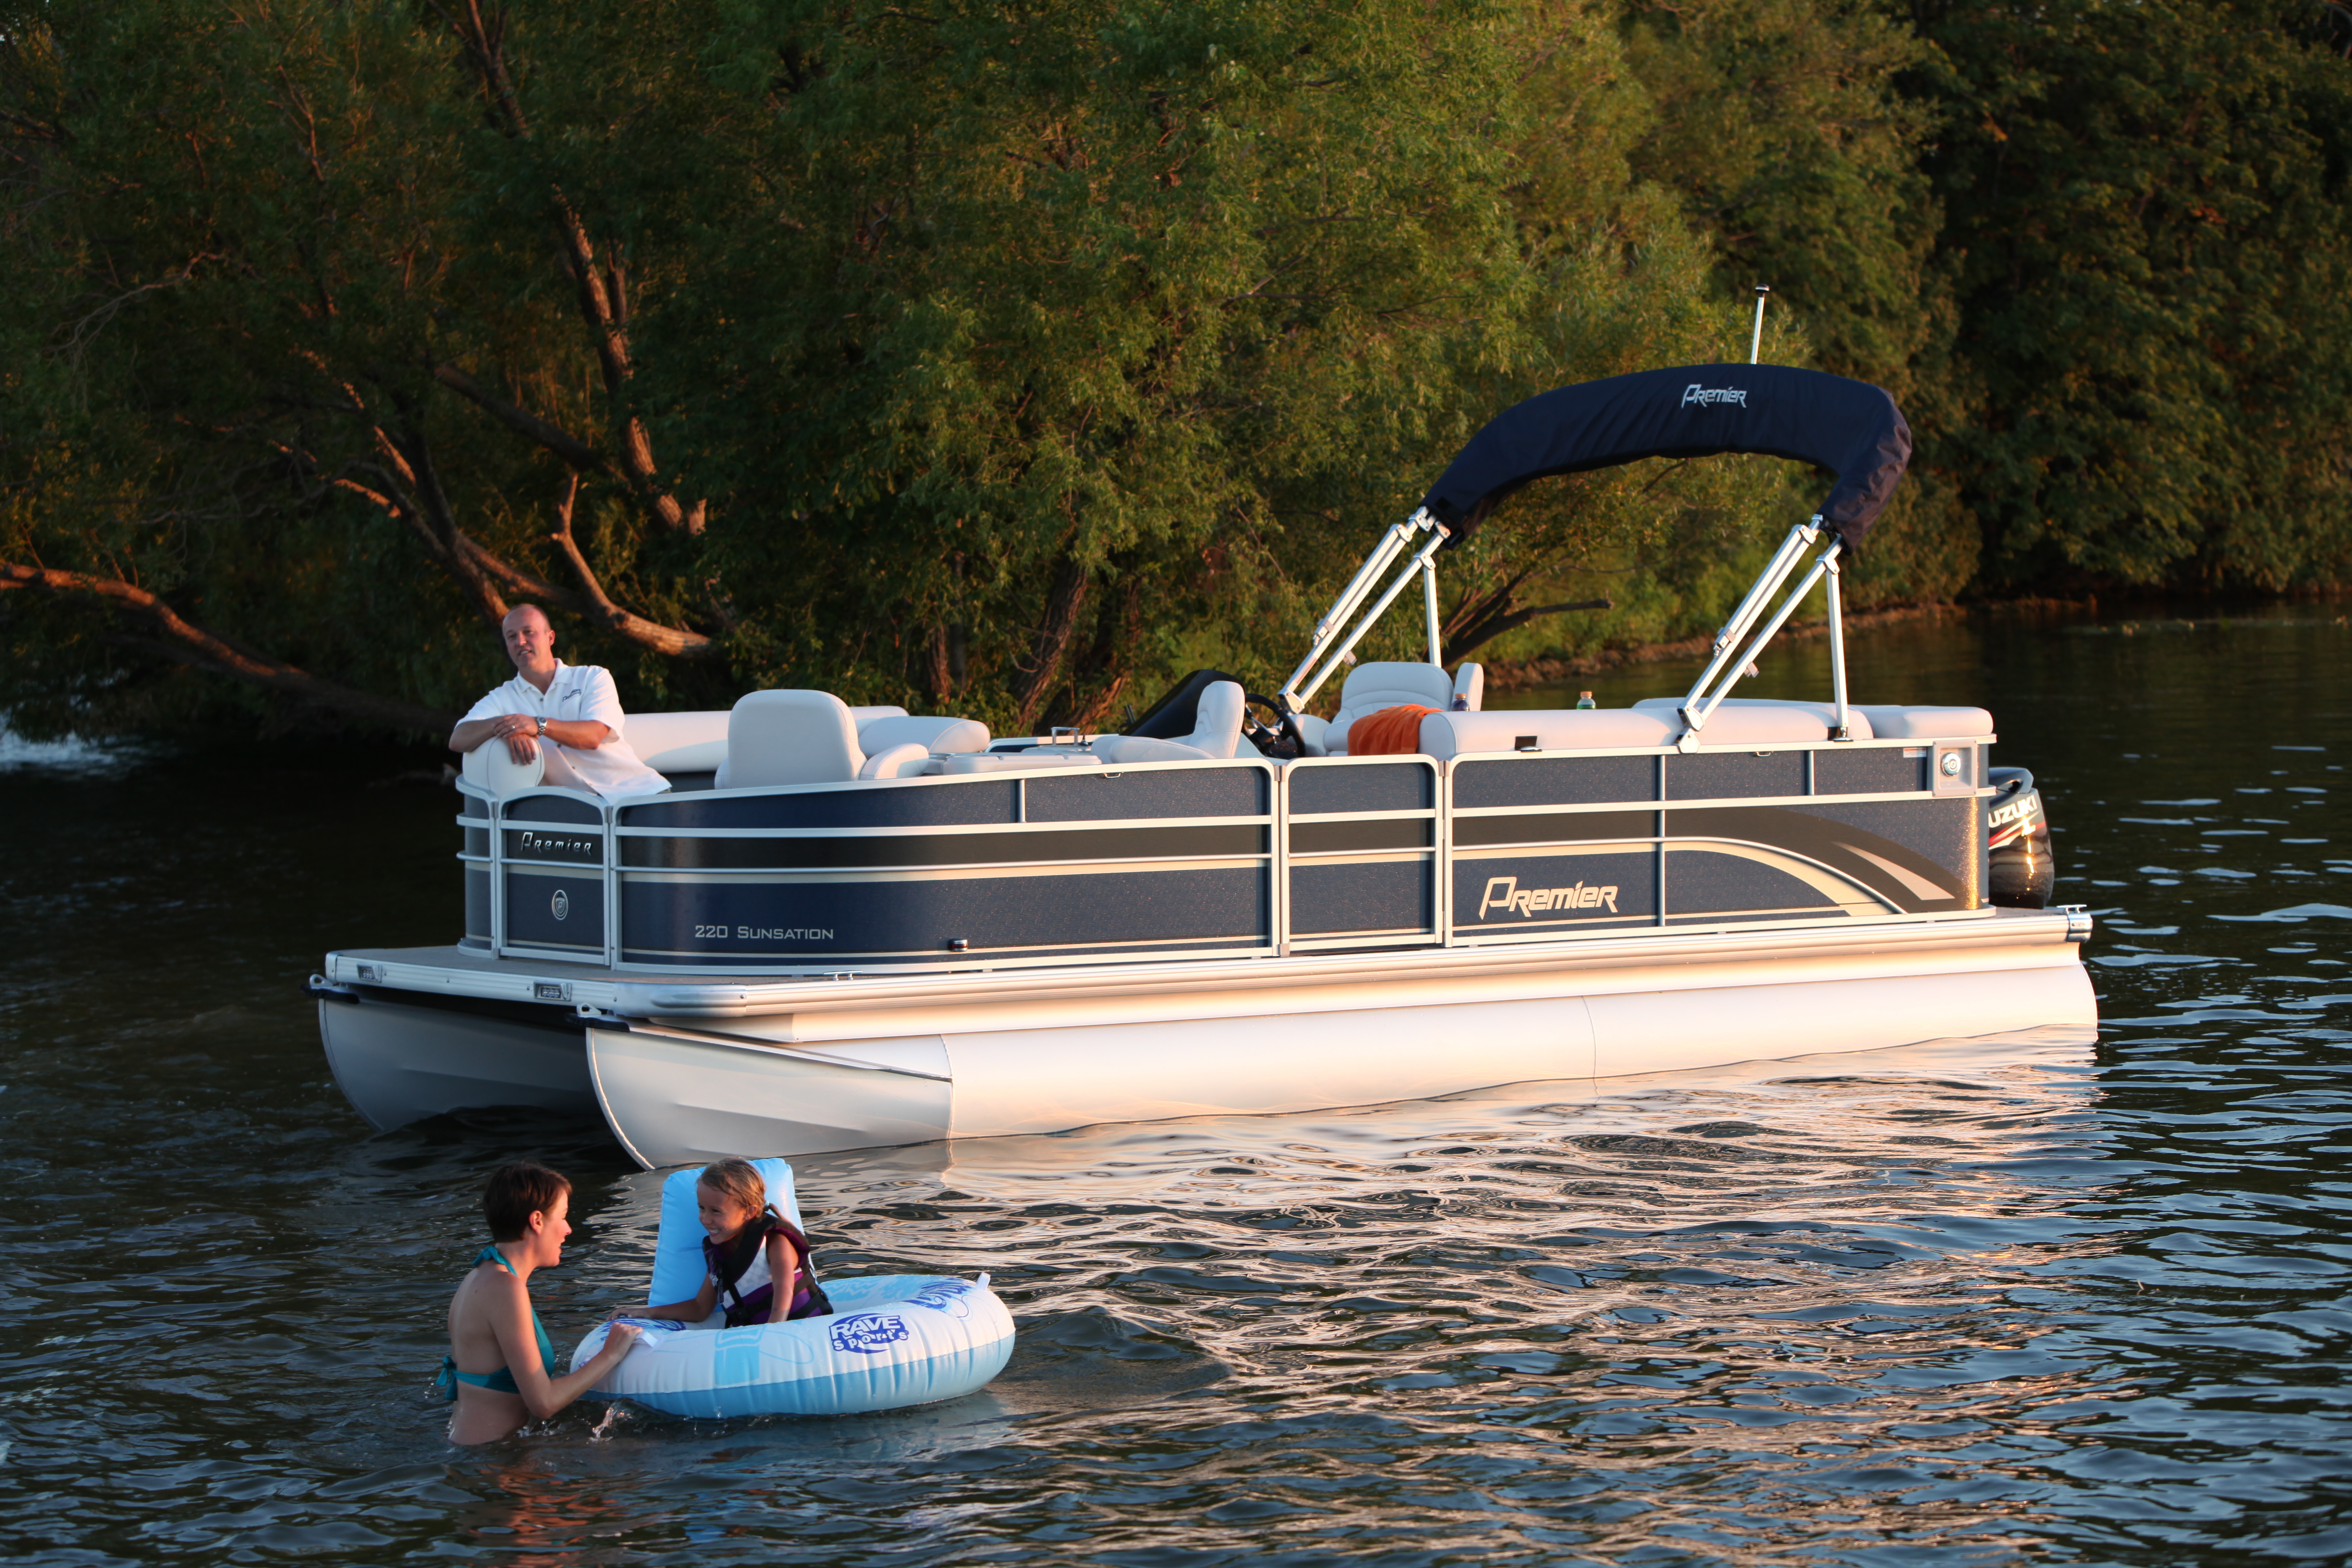 Pontoon boats for sale anderson sc 14, aluminum boat kits ...